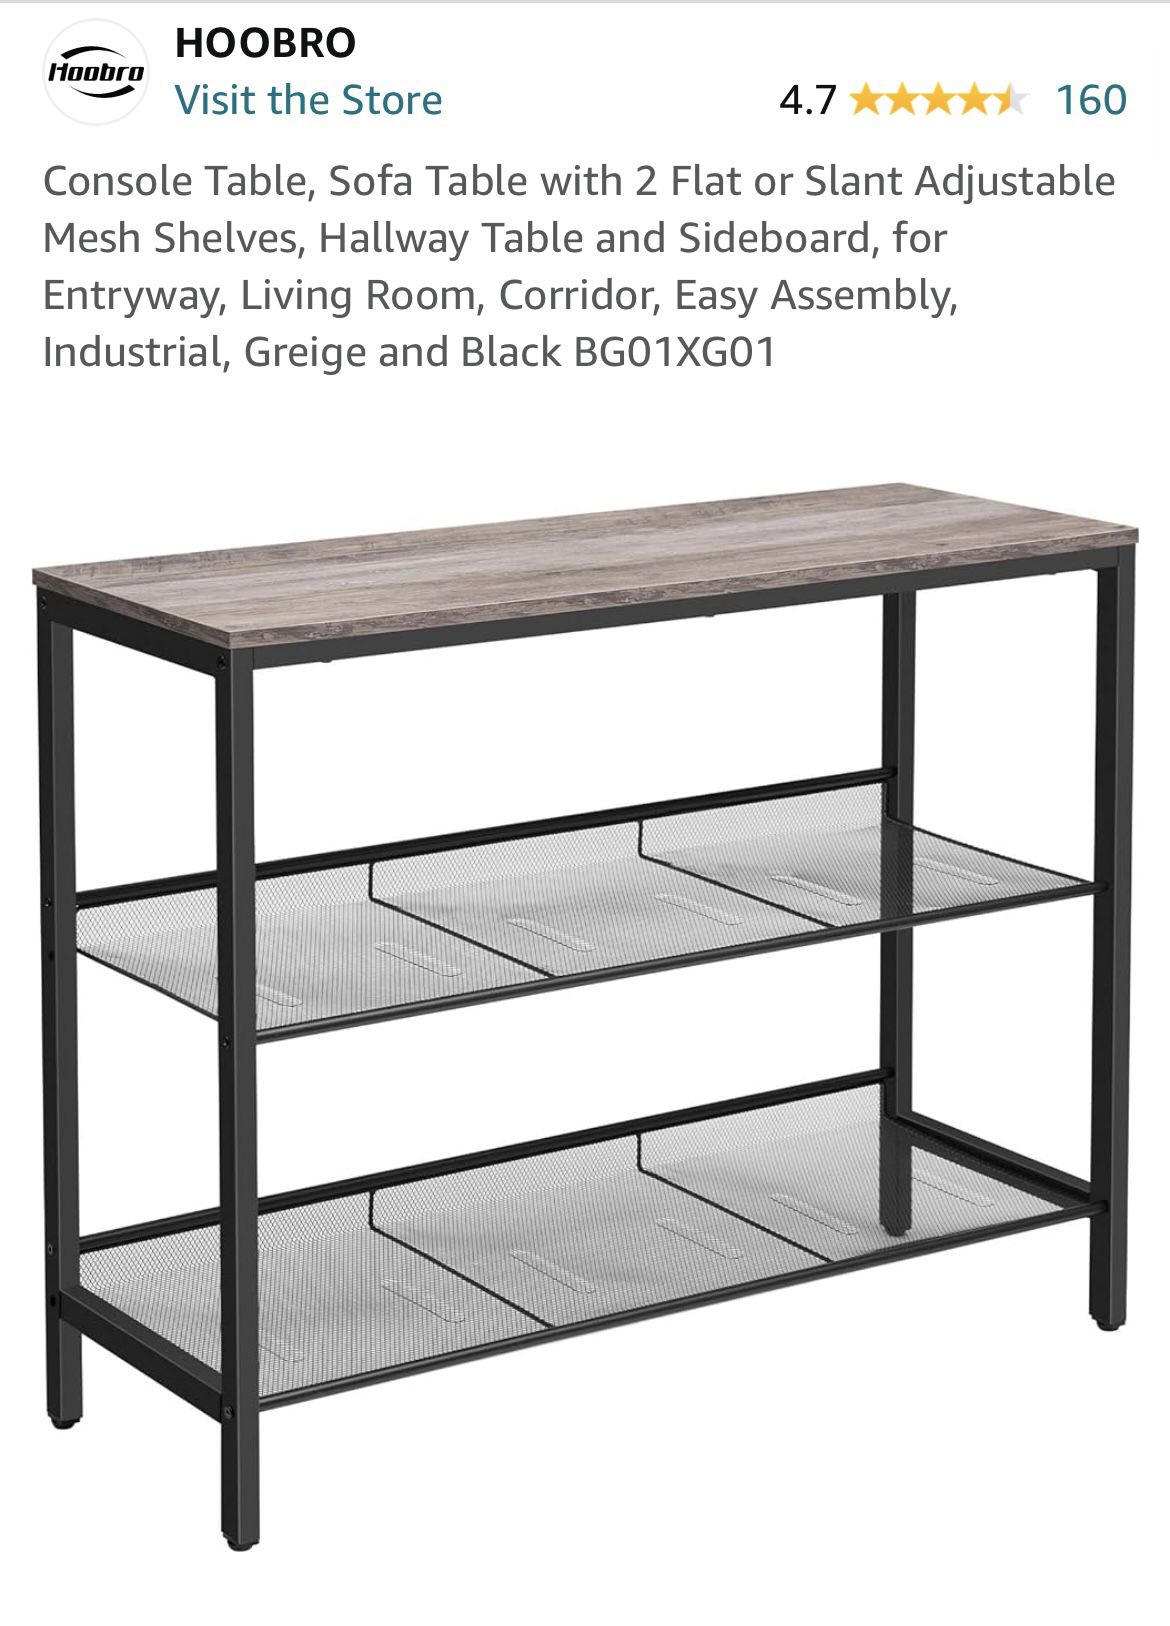 Sleek Console And Shelving Unit. BRAND NEW!